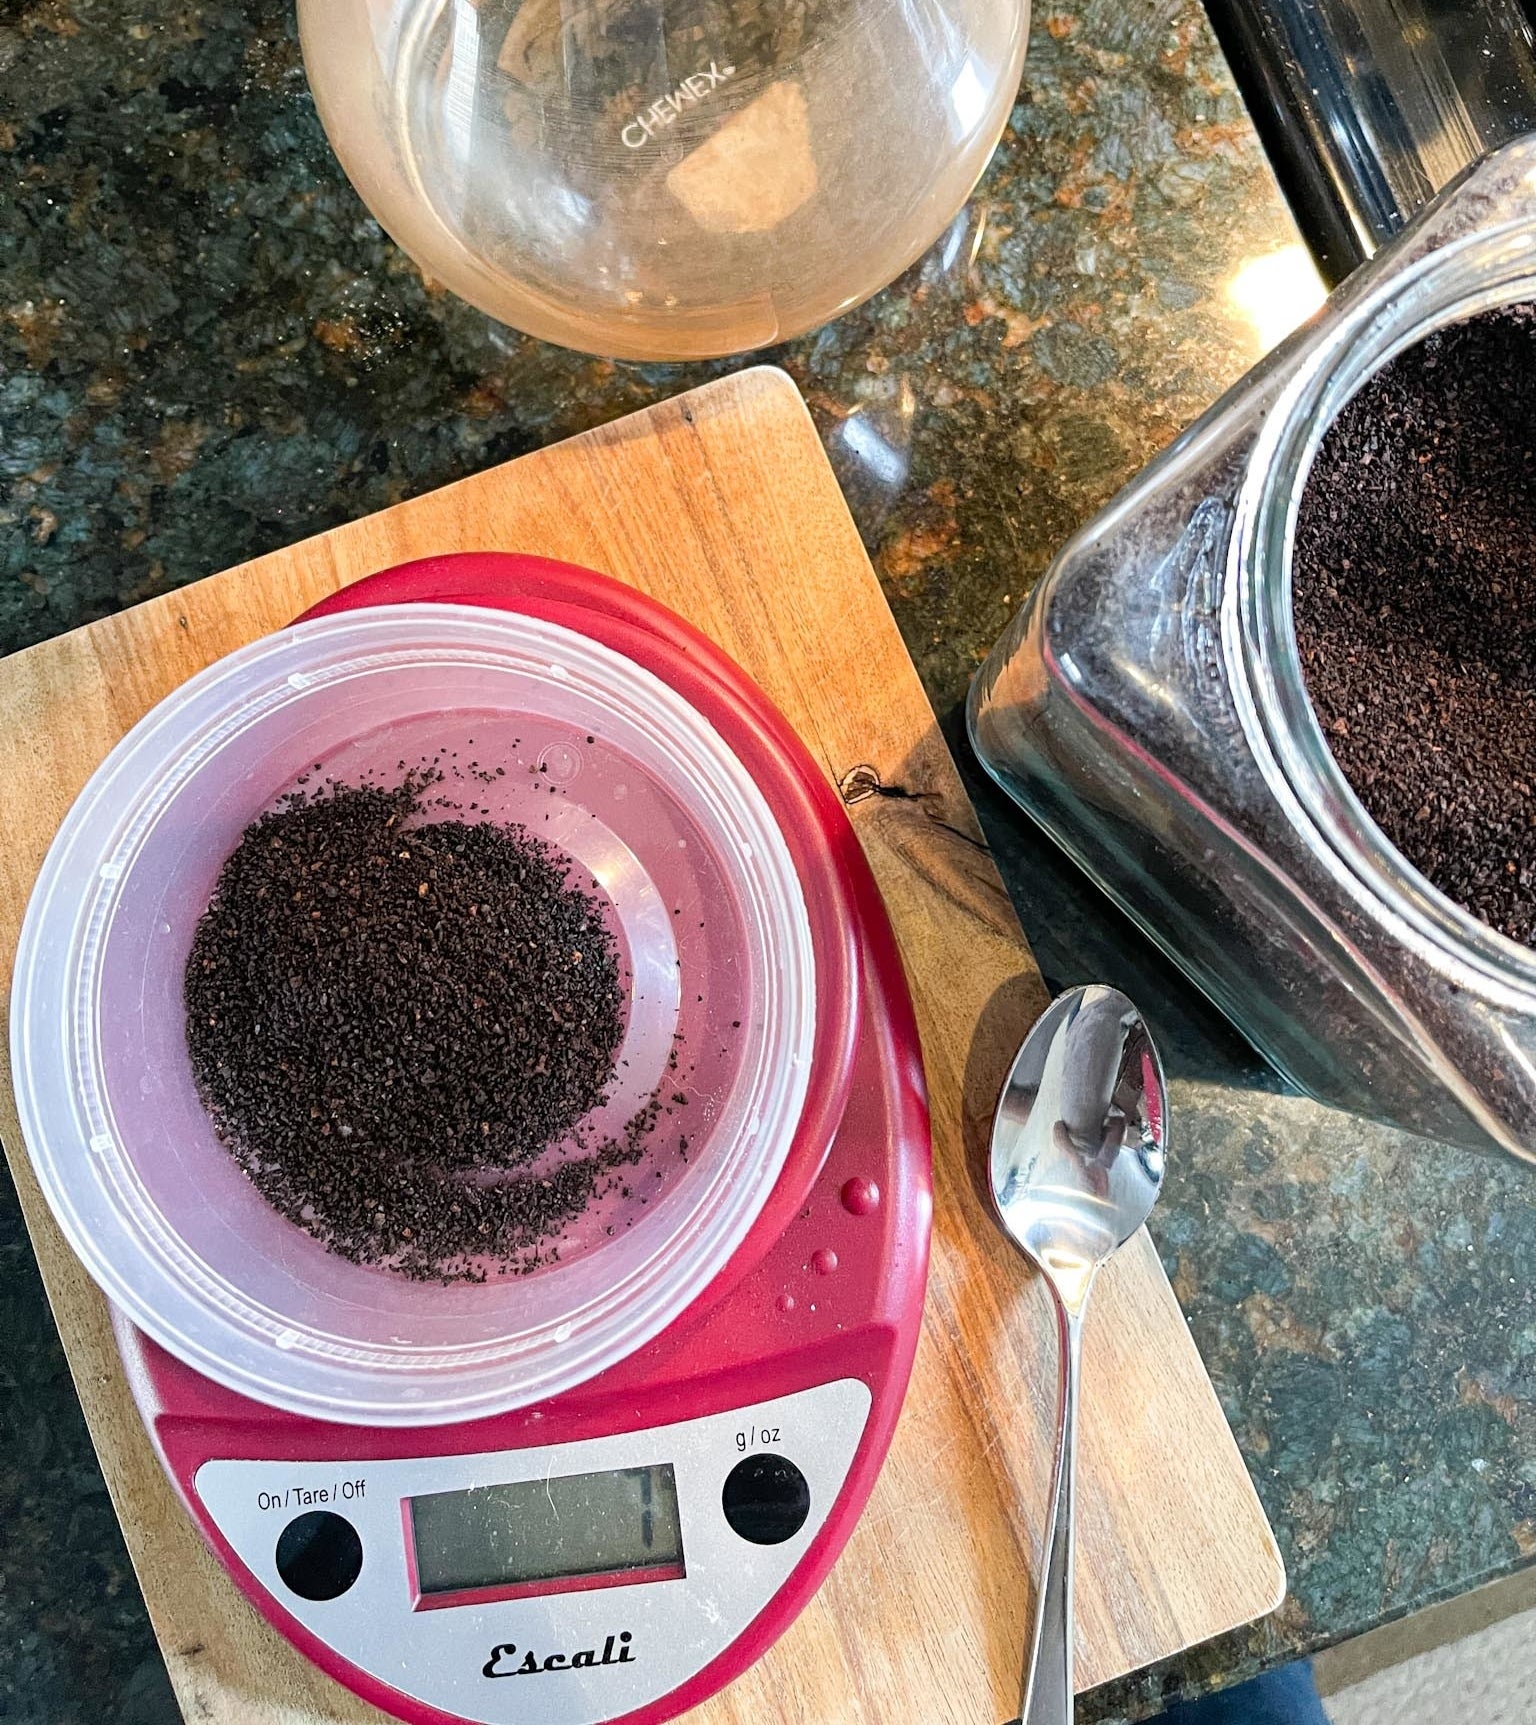 Kitchen scale being used to measure coffee